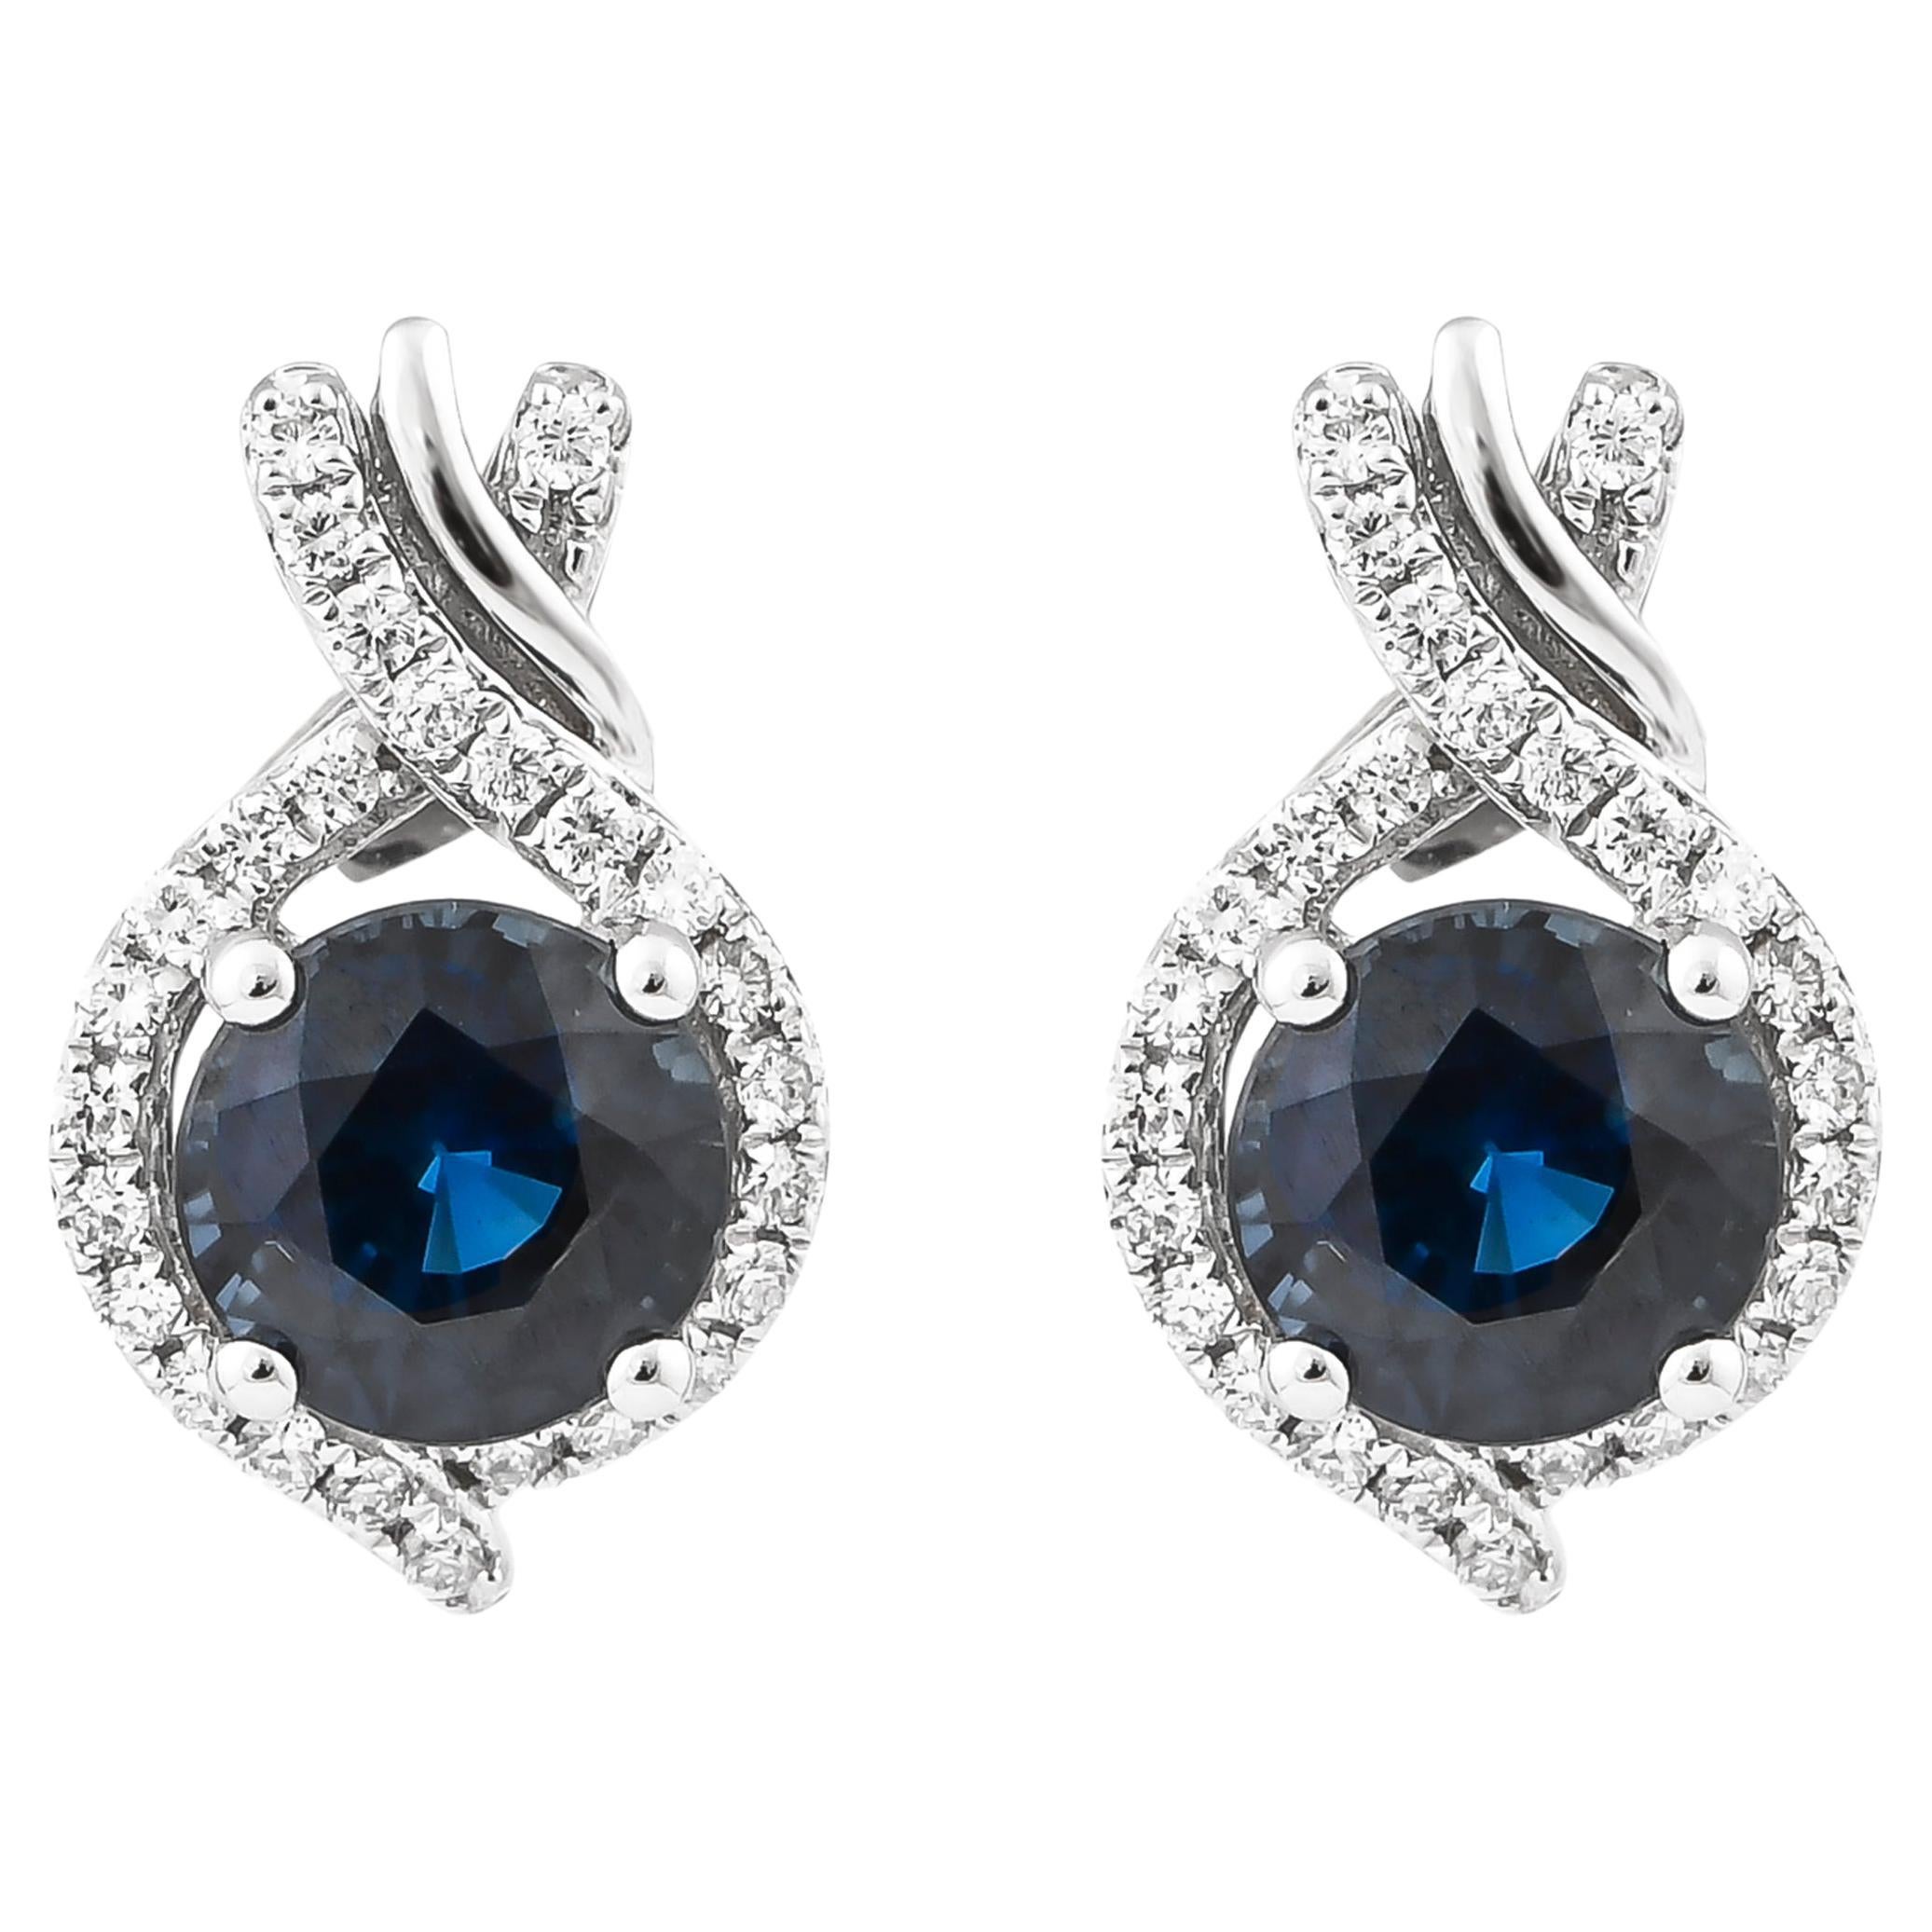 1.9 Carat Blue Sapphire and Diamond Earring in 18 Karat White Gold For Sale